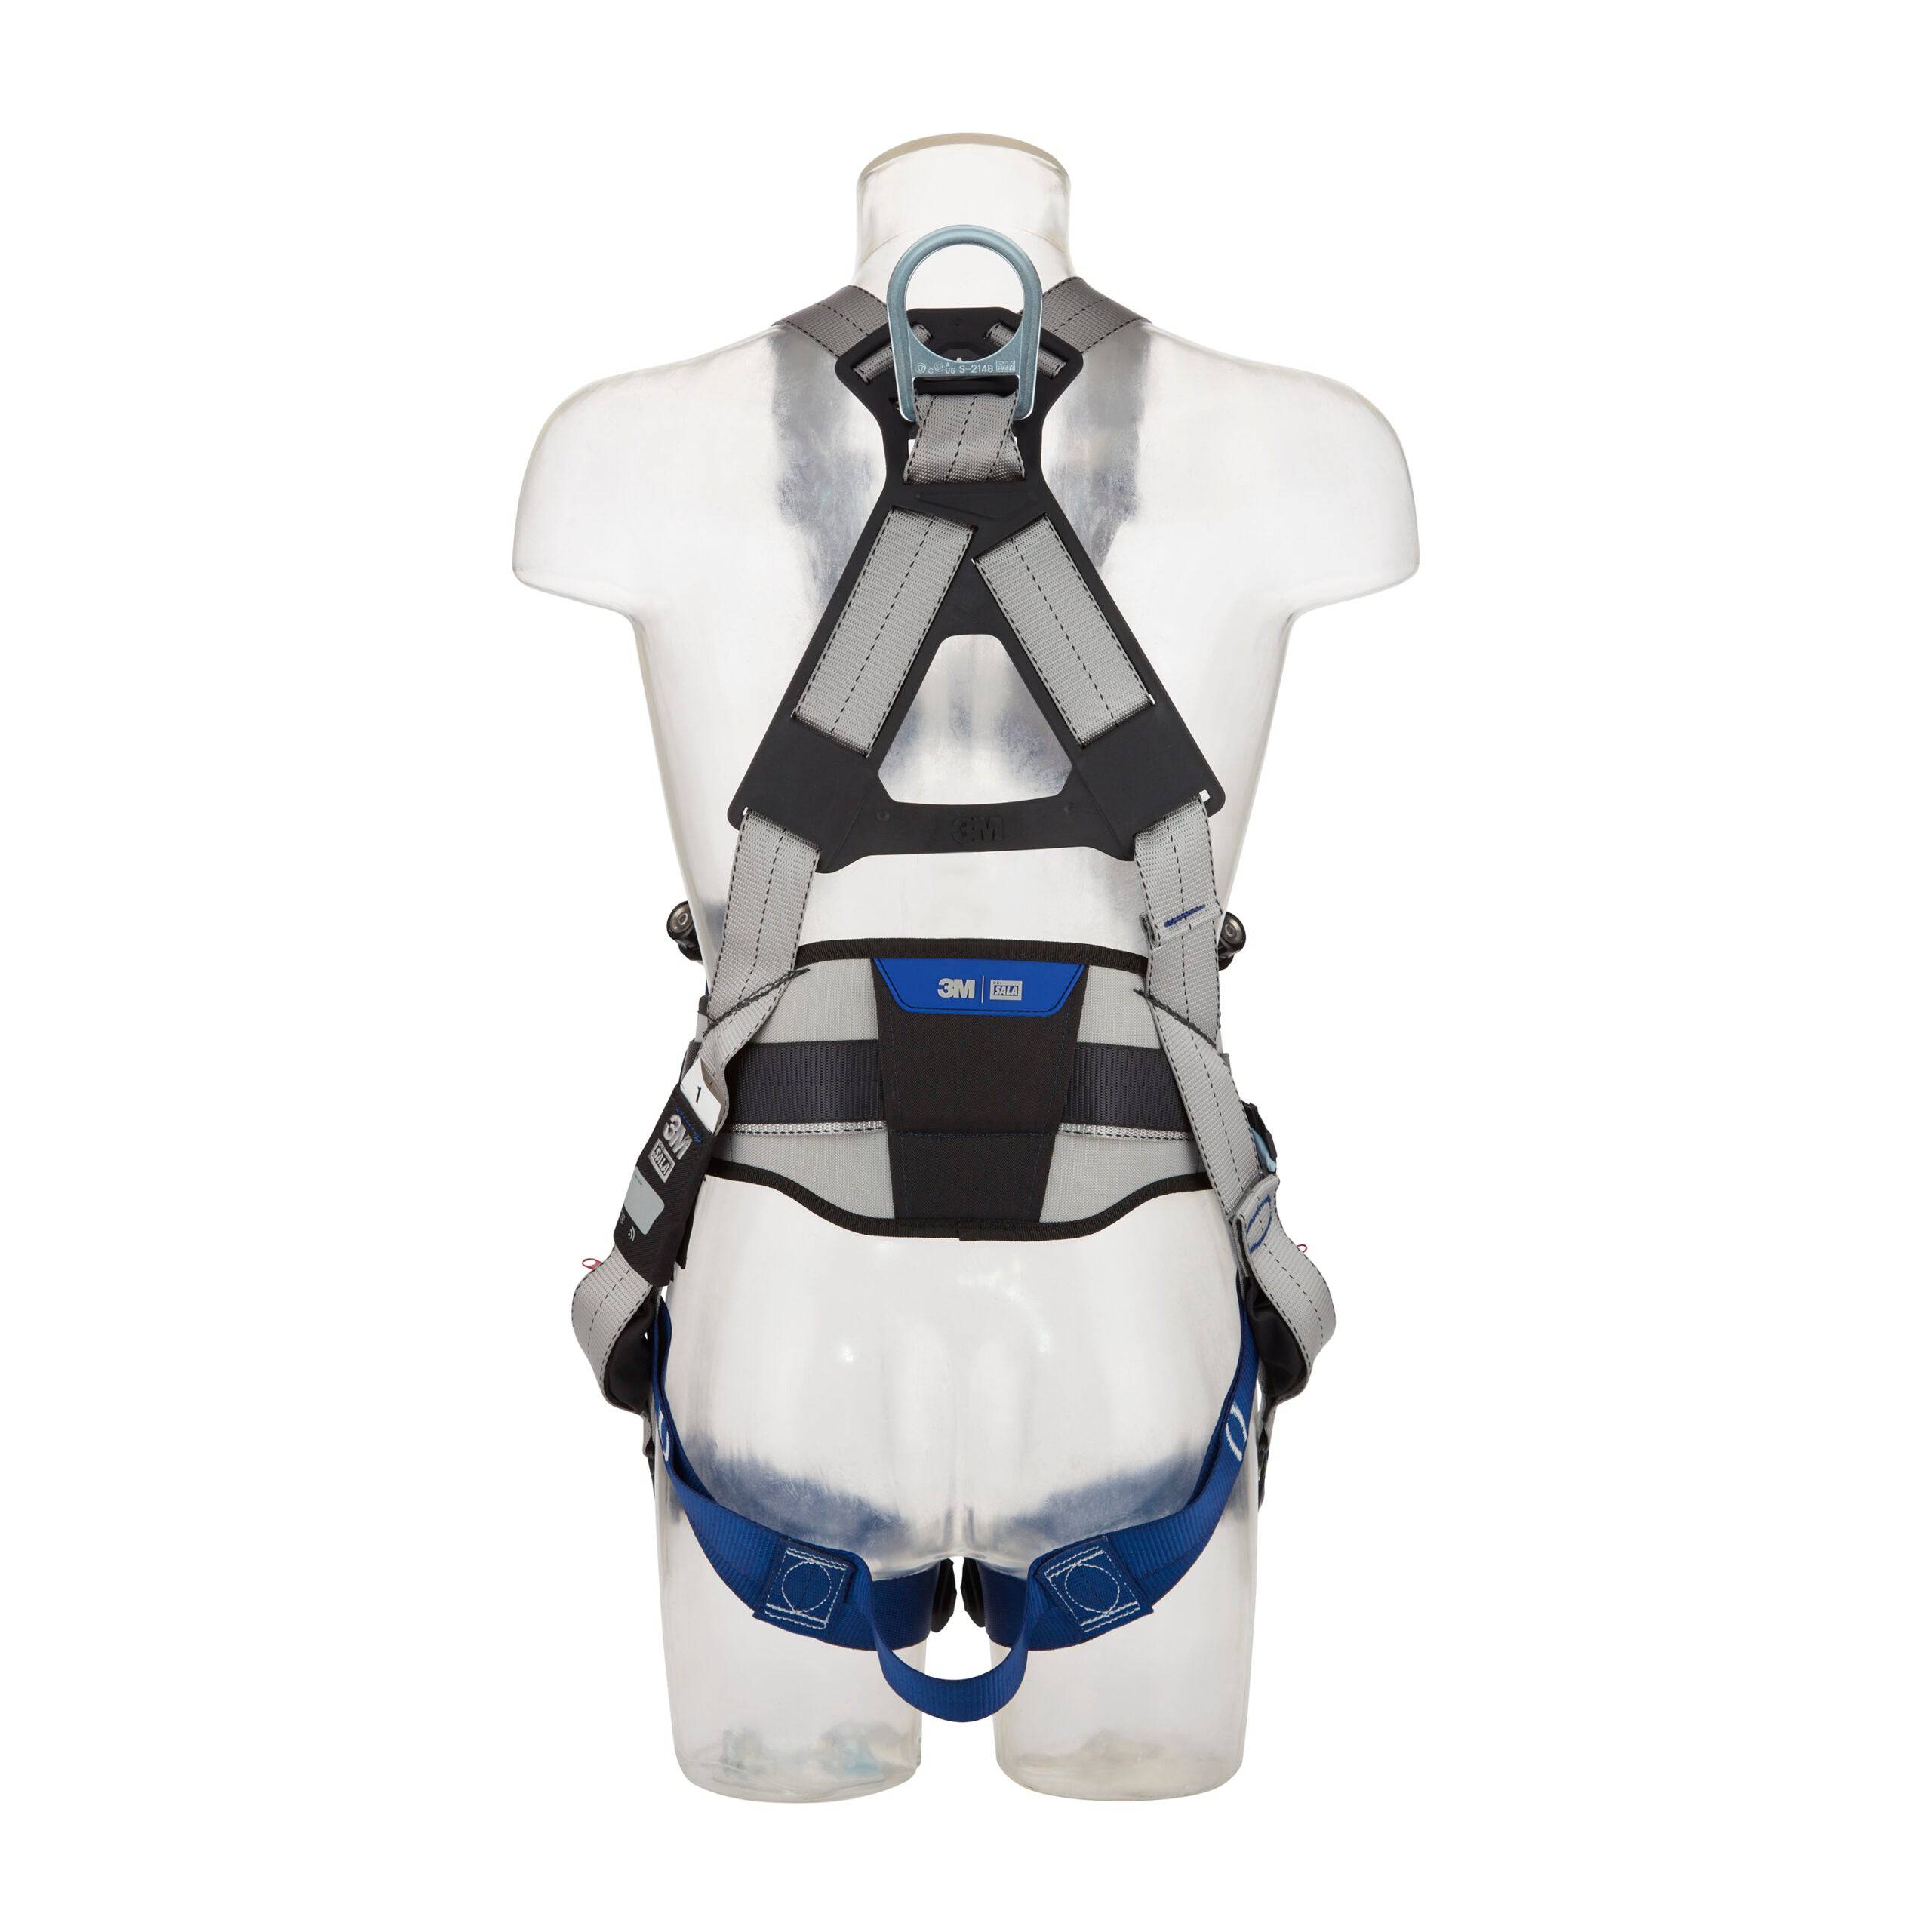 3M DBI SALA ExoFit XE50 Quick Connect Positioning Safety Harness - SecureHeights